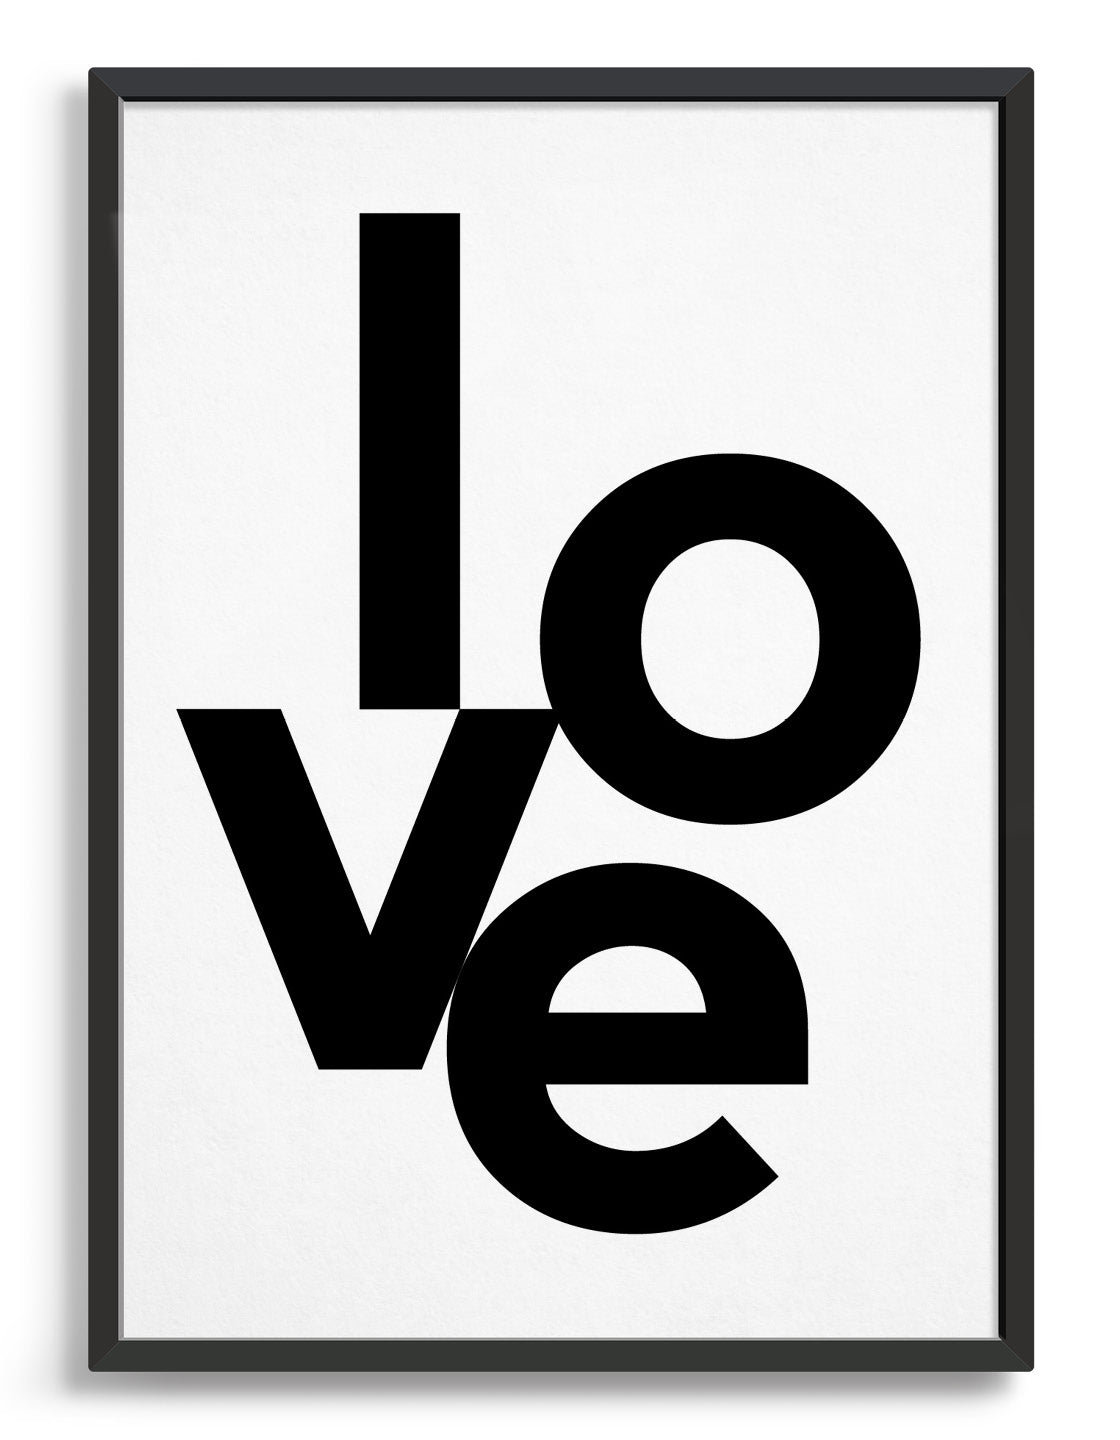 framed typography art print with the word love in black type against a white background